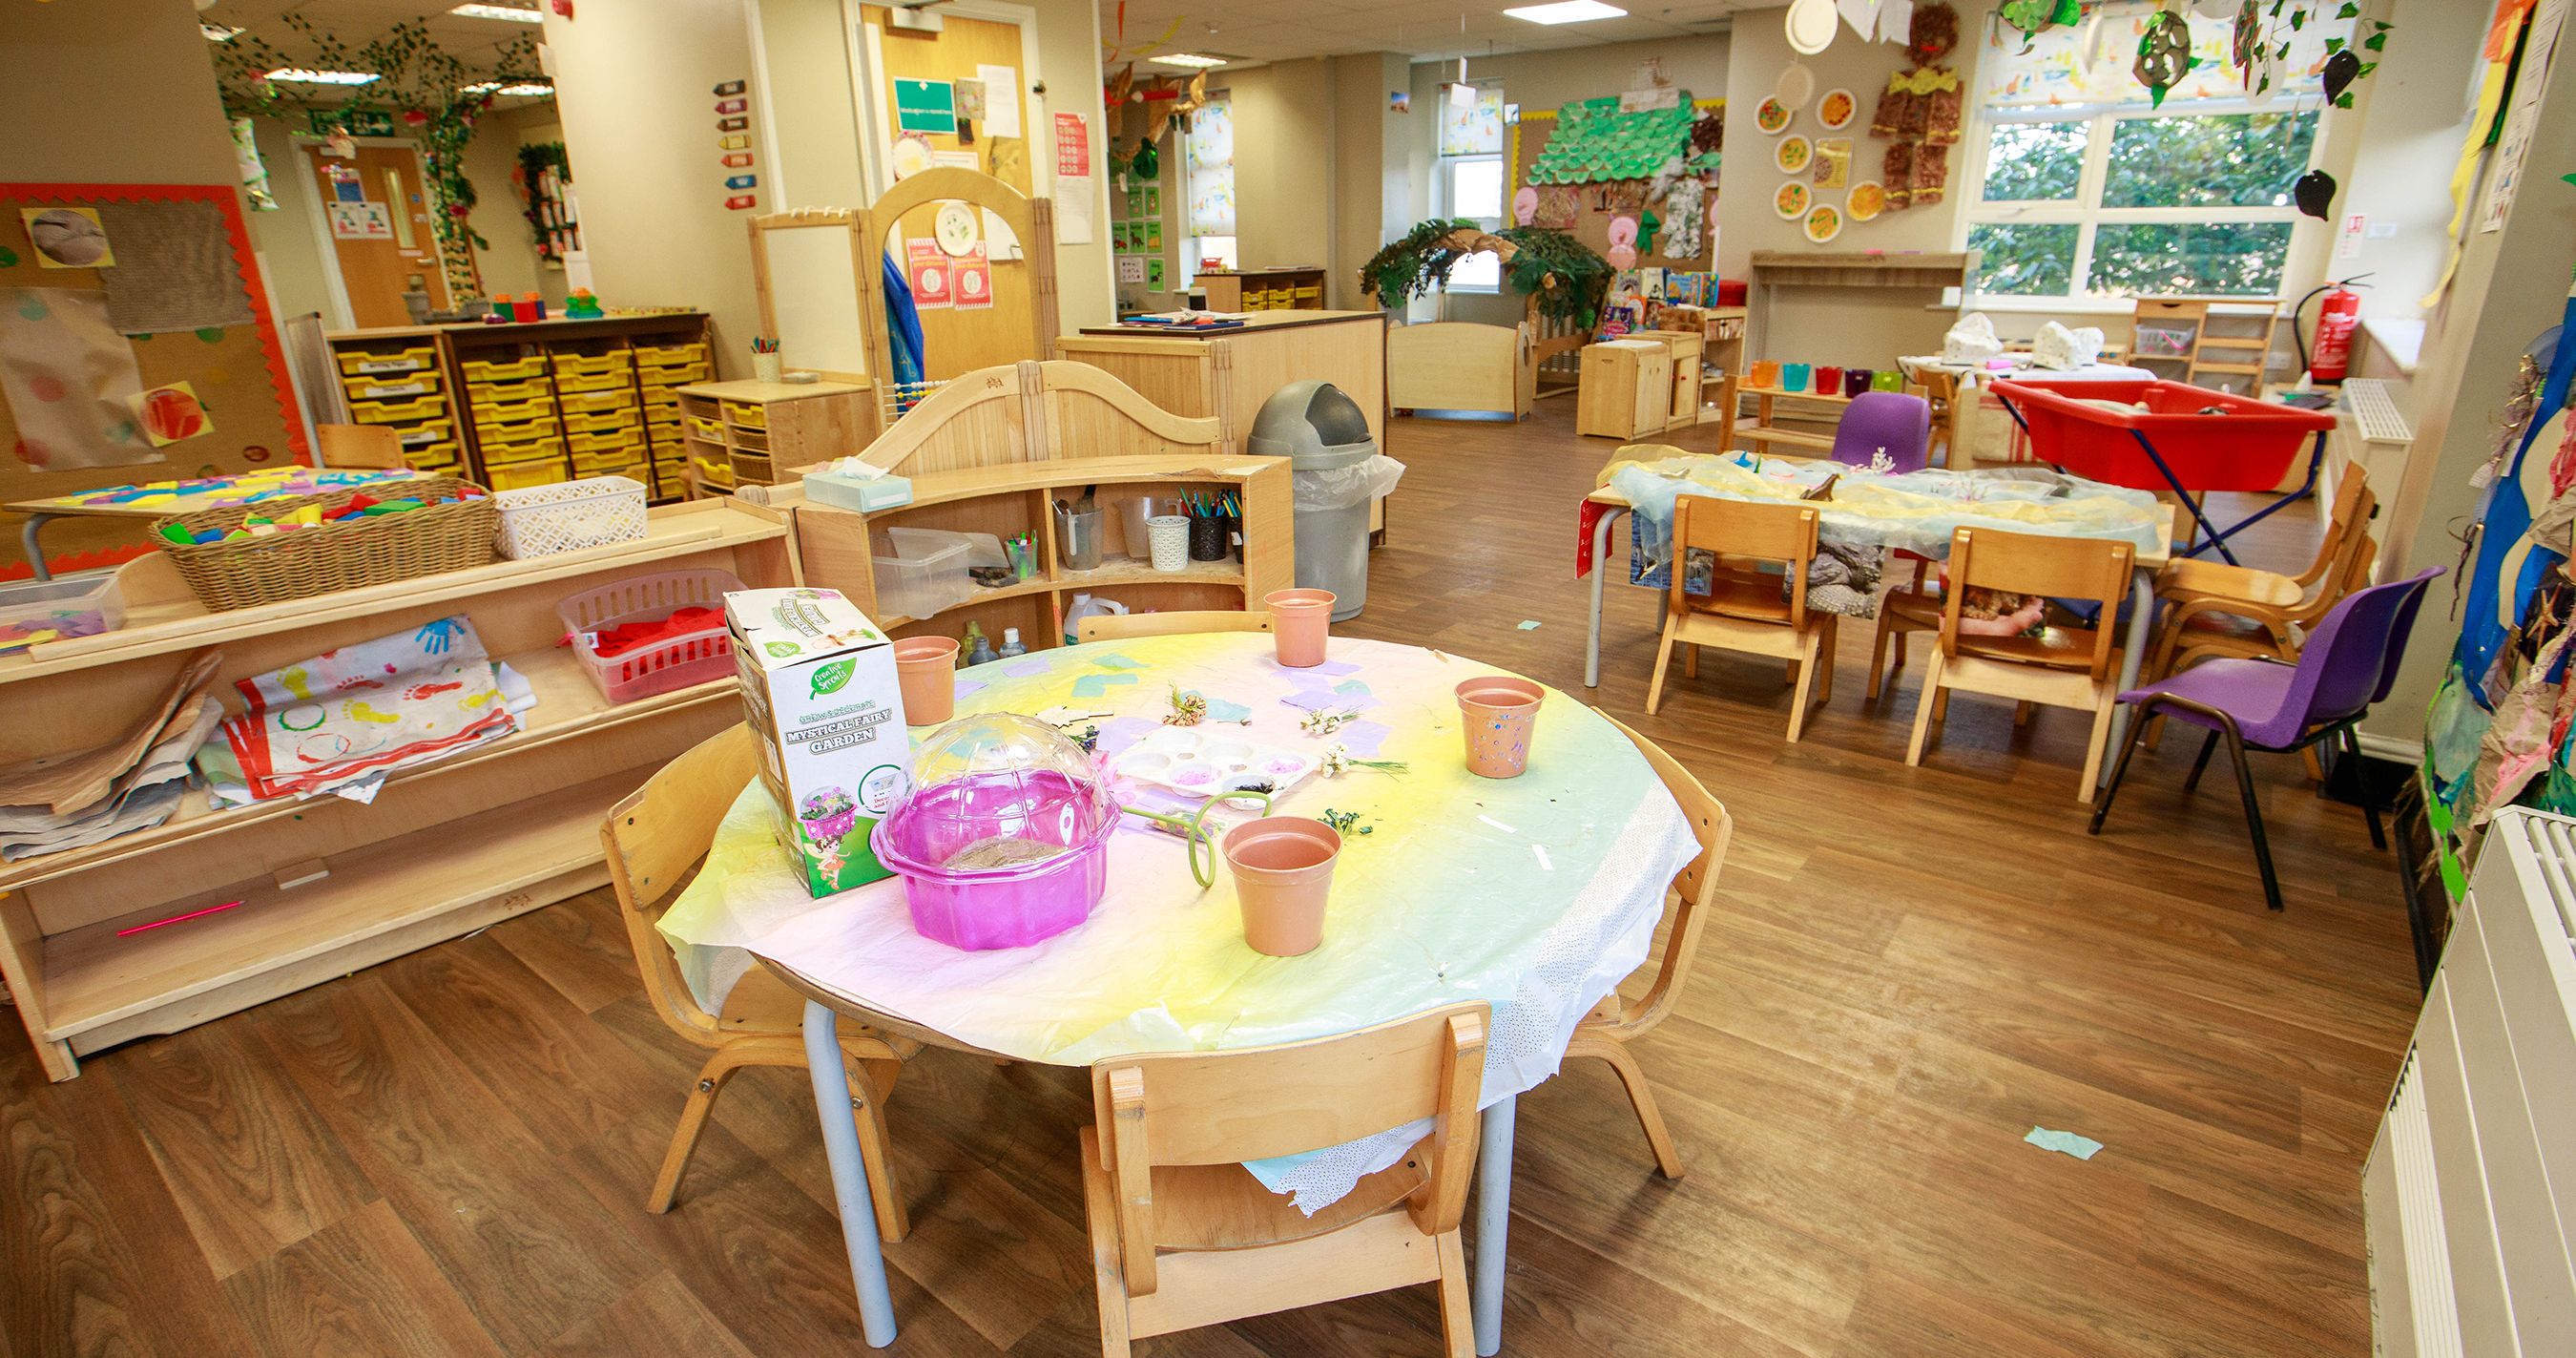 Busy Bees at Wigan, Scholes - The best start in life Busy Bees at Wigan, Scholes Wigan 01942 239939